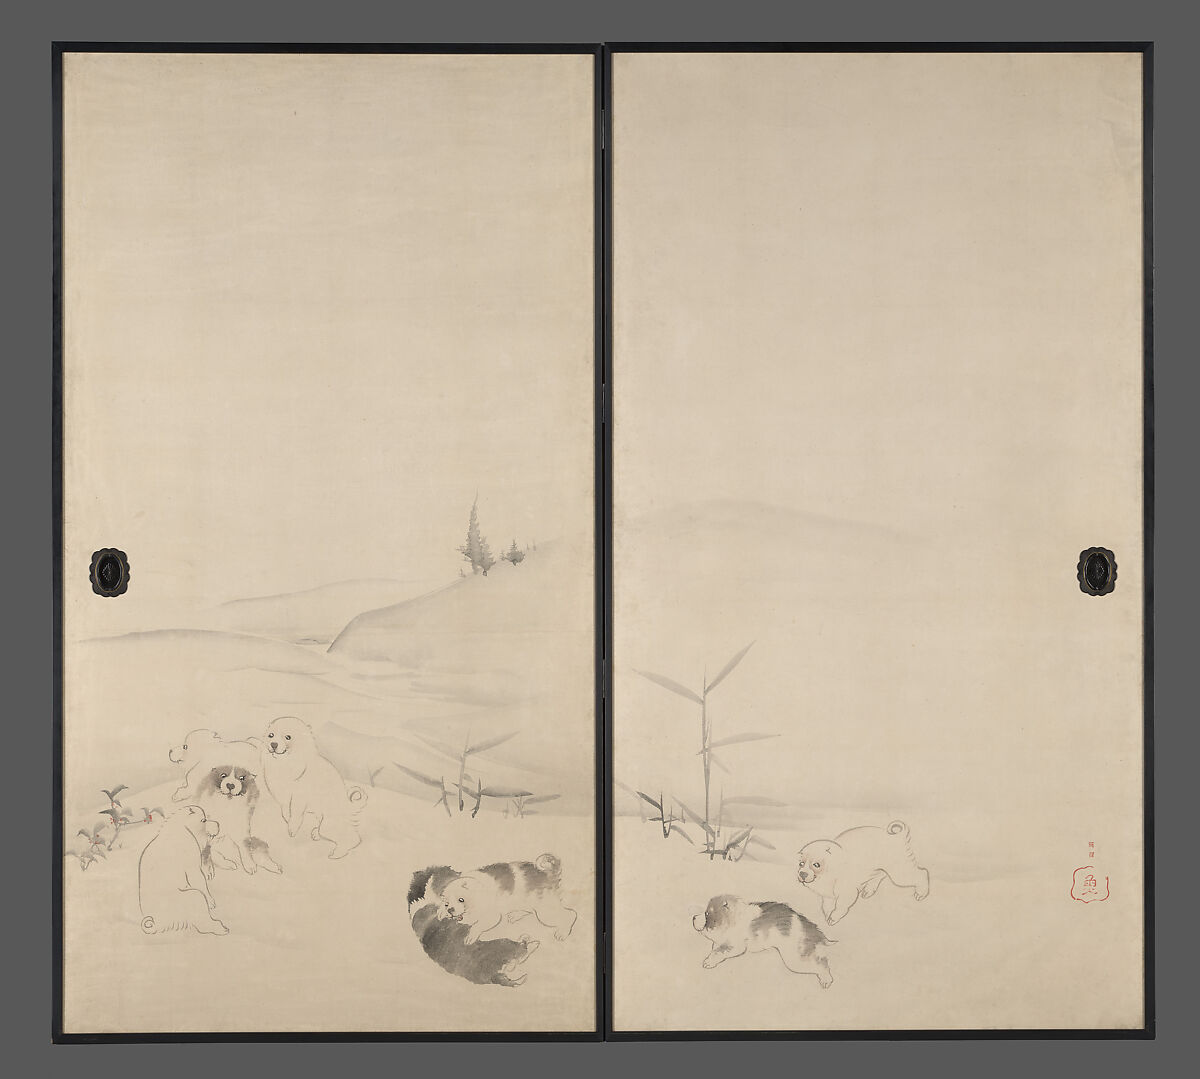 Puppies in the Snow, Nagasawa Rosetsu 長澤蘆雪, Set of four sliding panels mounted as a pair of two-panel screens; ink and color on paper, Japan